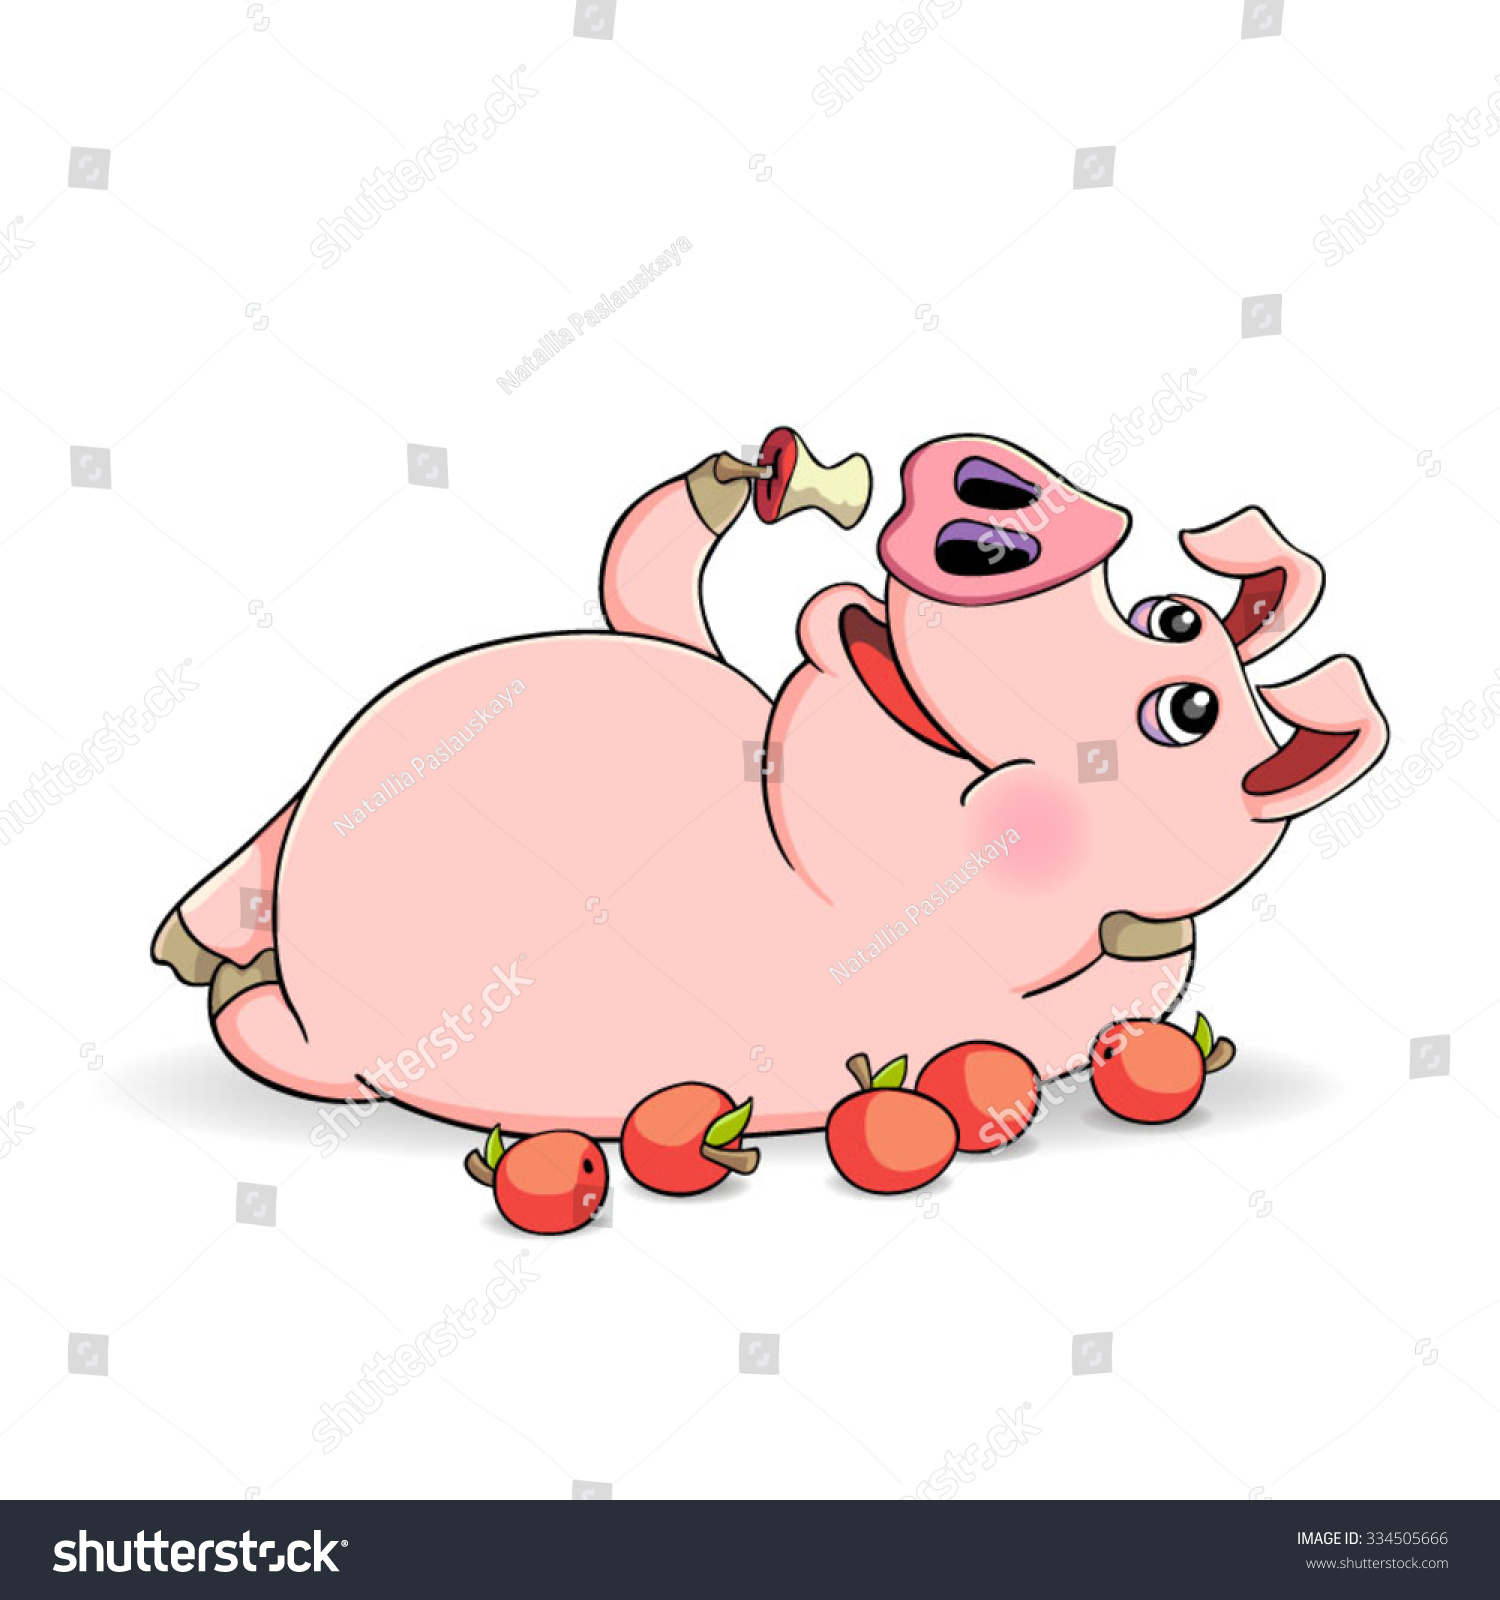 pig eating clipart - photo #7